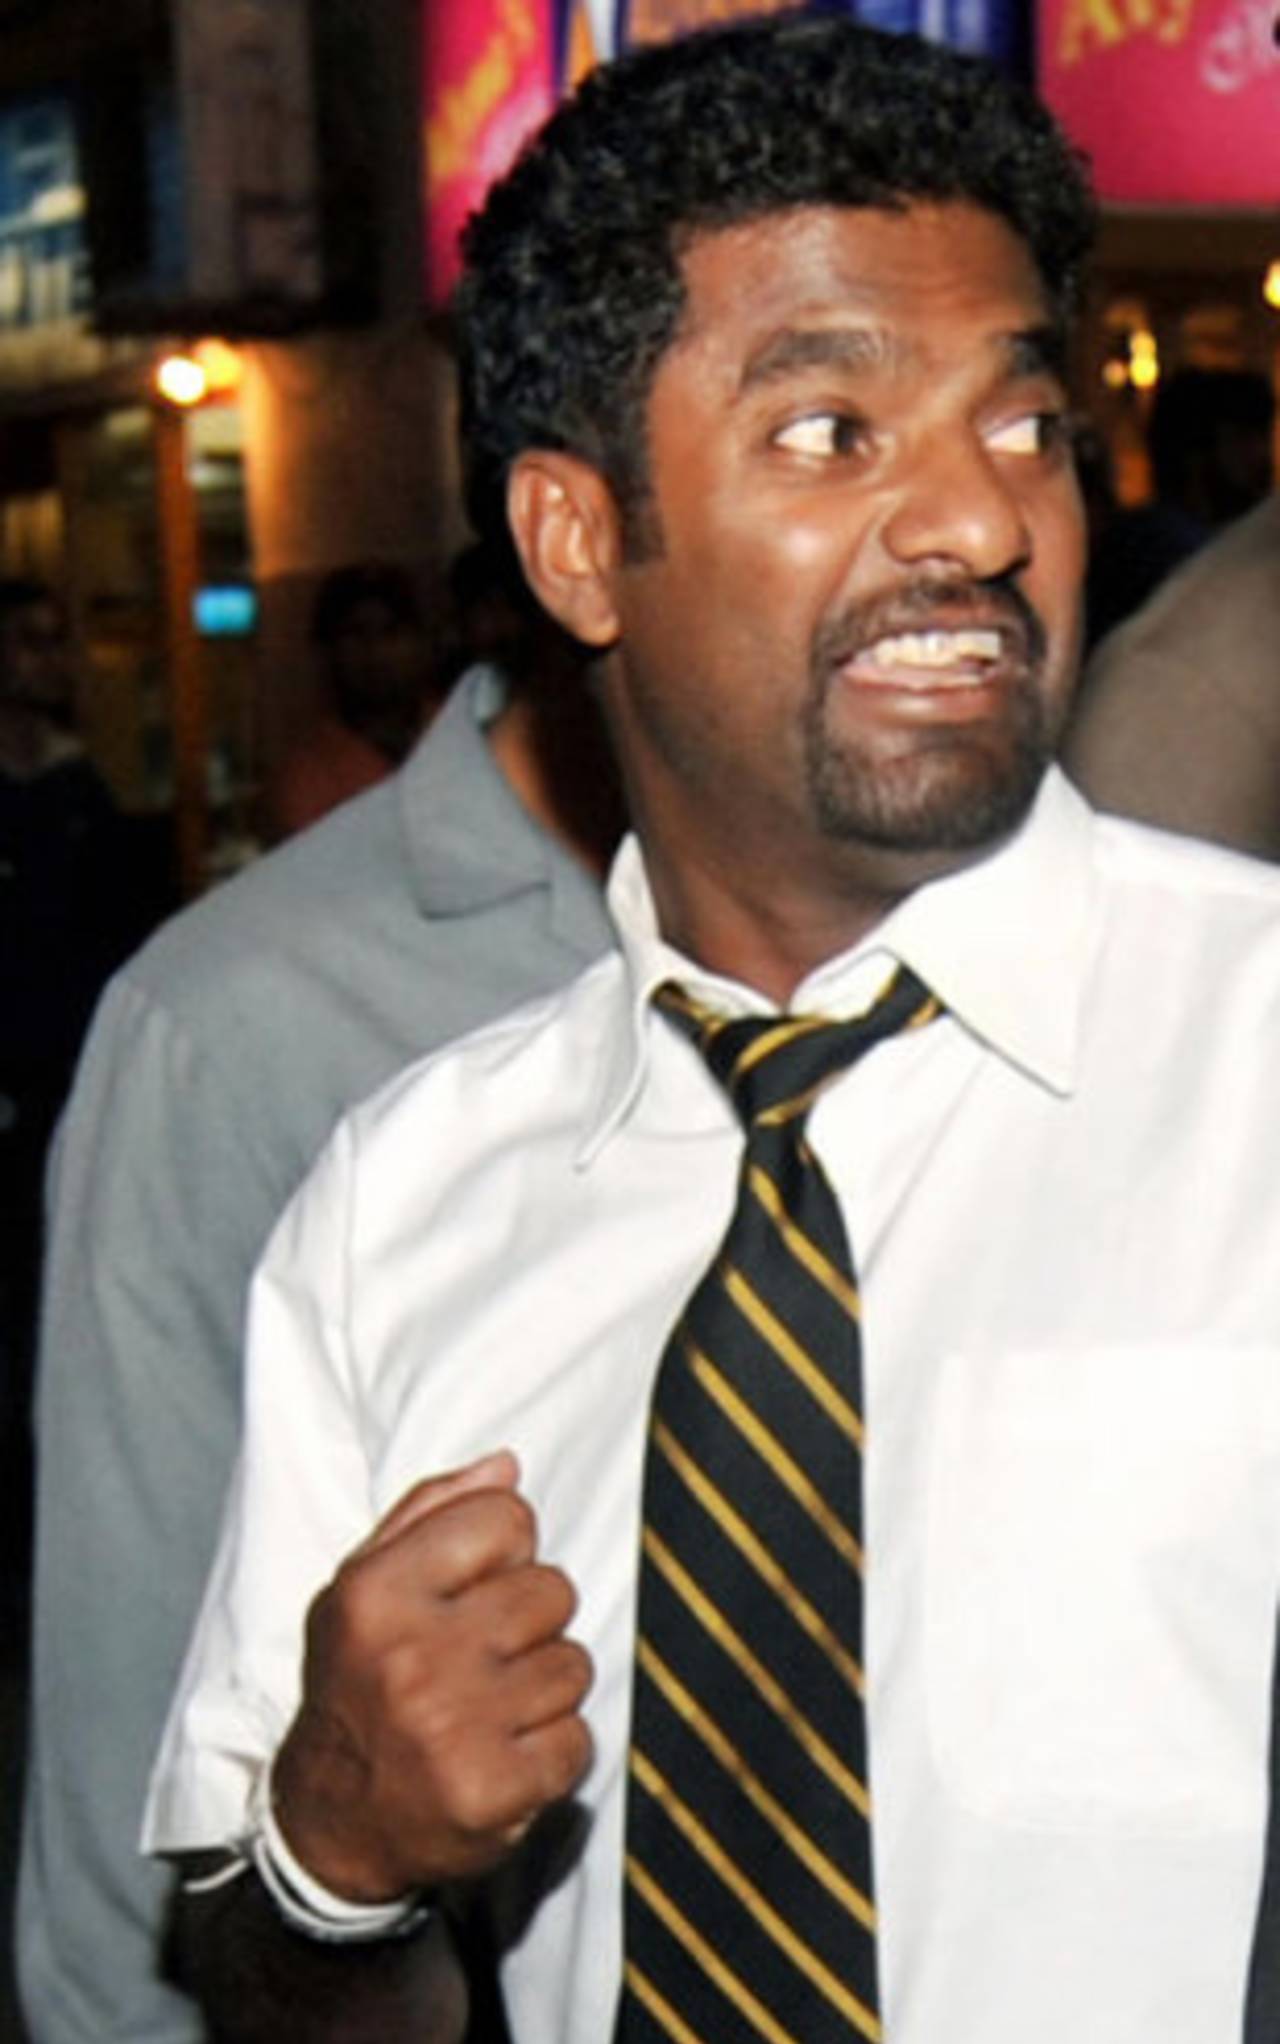 Muttiah Muralitharan walks out of the Karachi airport after the team's arrival for the Test series, Karachi, February 15, 2009